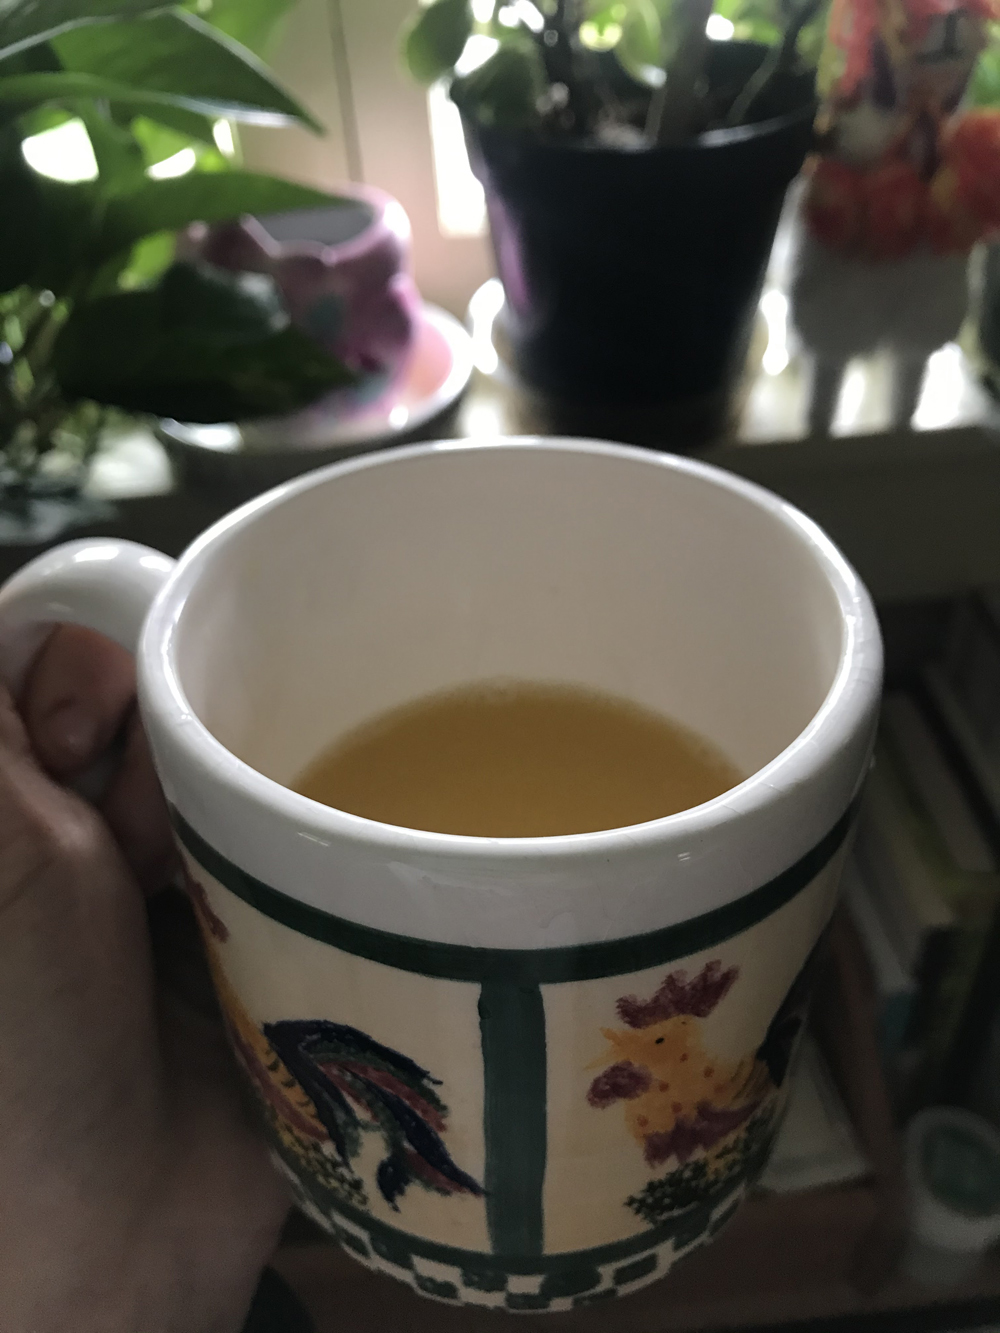 A coffee mug with orange juice inside is being held in the left hand of a person. In the background are indoor plants. Photo by Darya Shahgheibi. 	